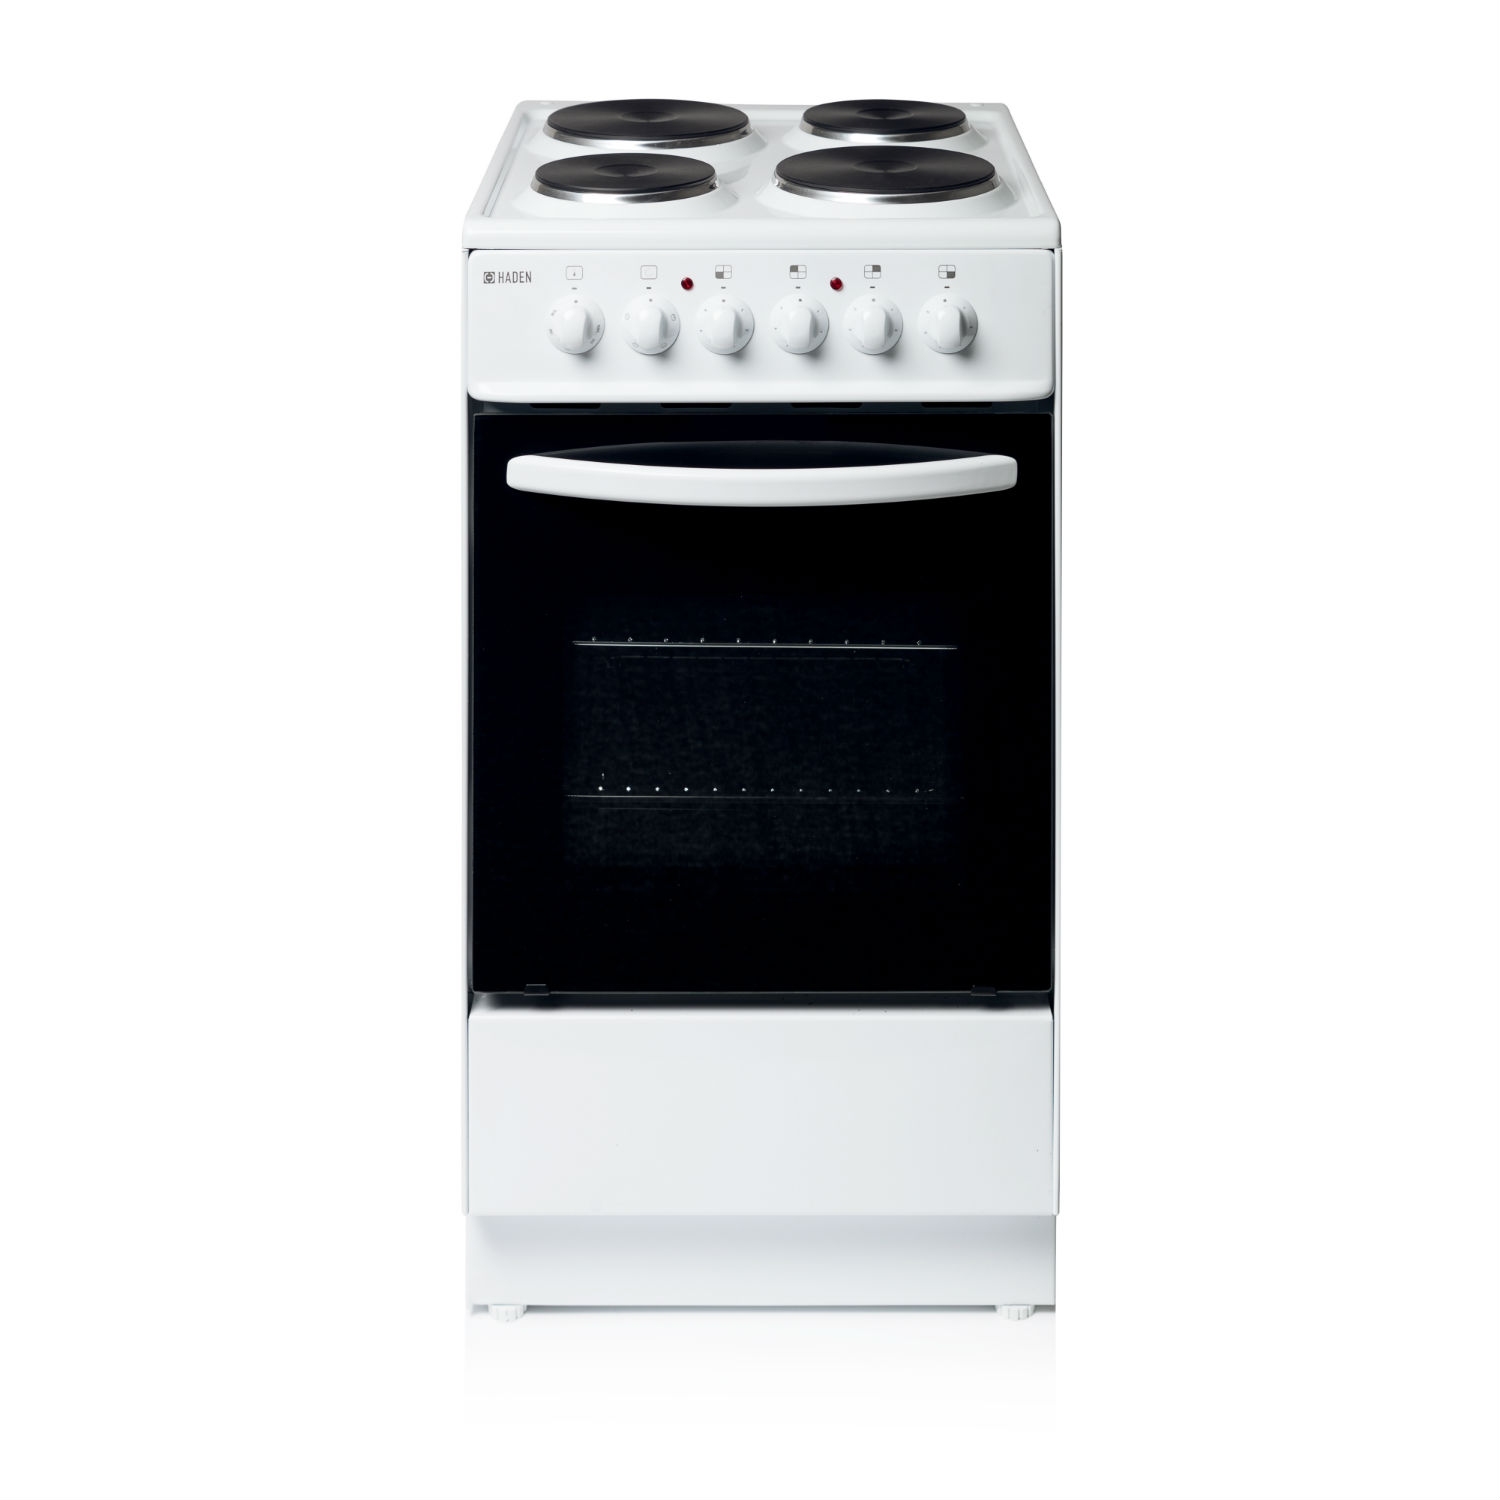 Haden HES50W 50cm Single Oven Electric Cooker - White - 0